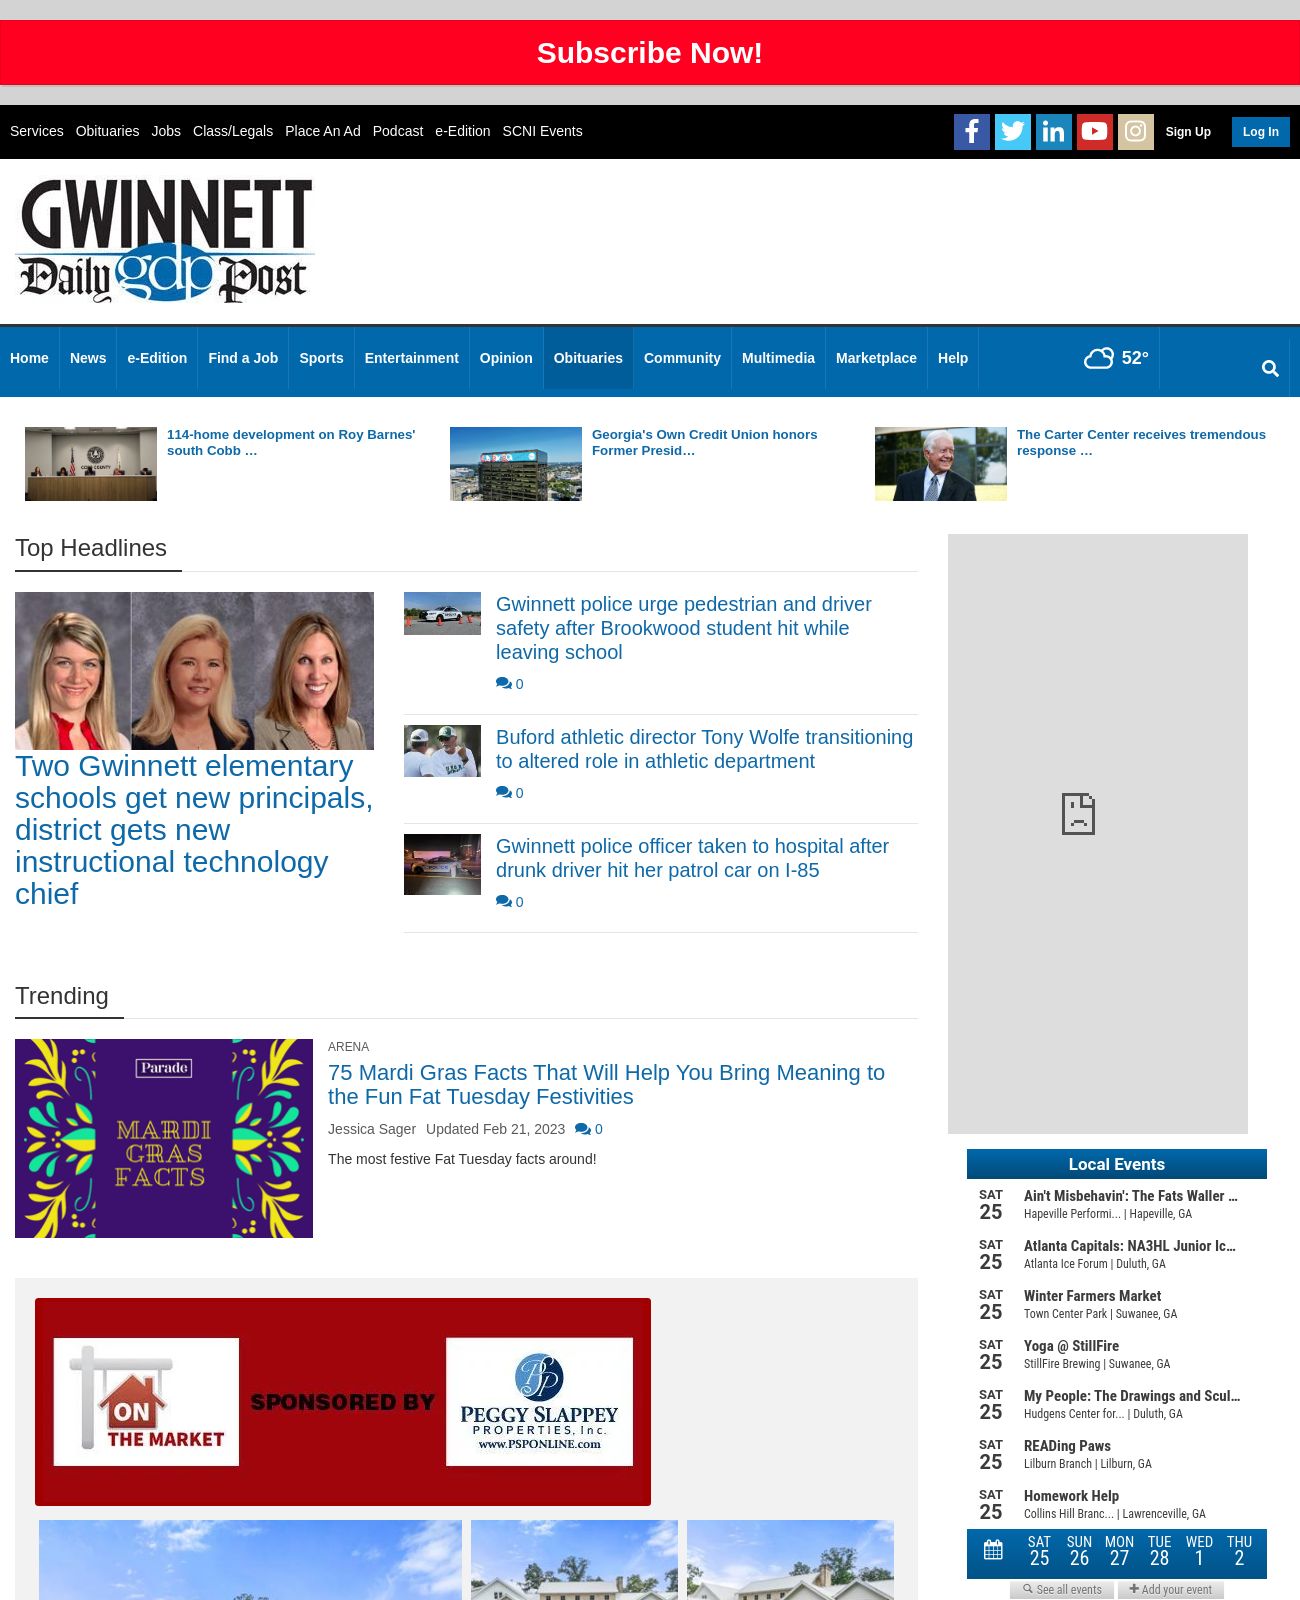 Gwinnett Daily Post at 2023-02-25 05:57:21-05:00 local time